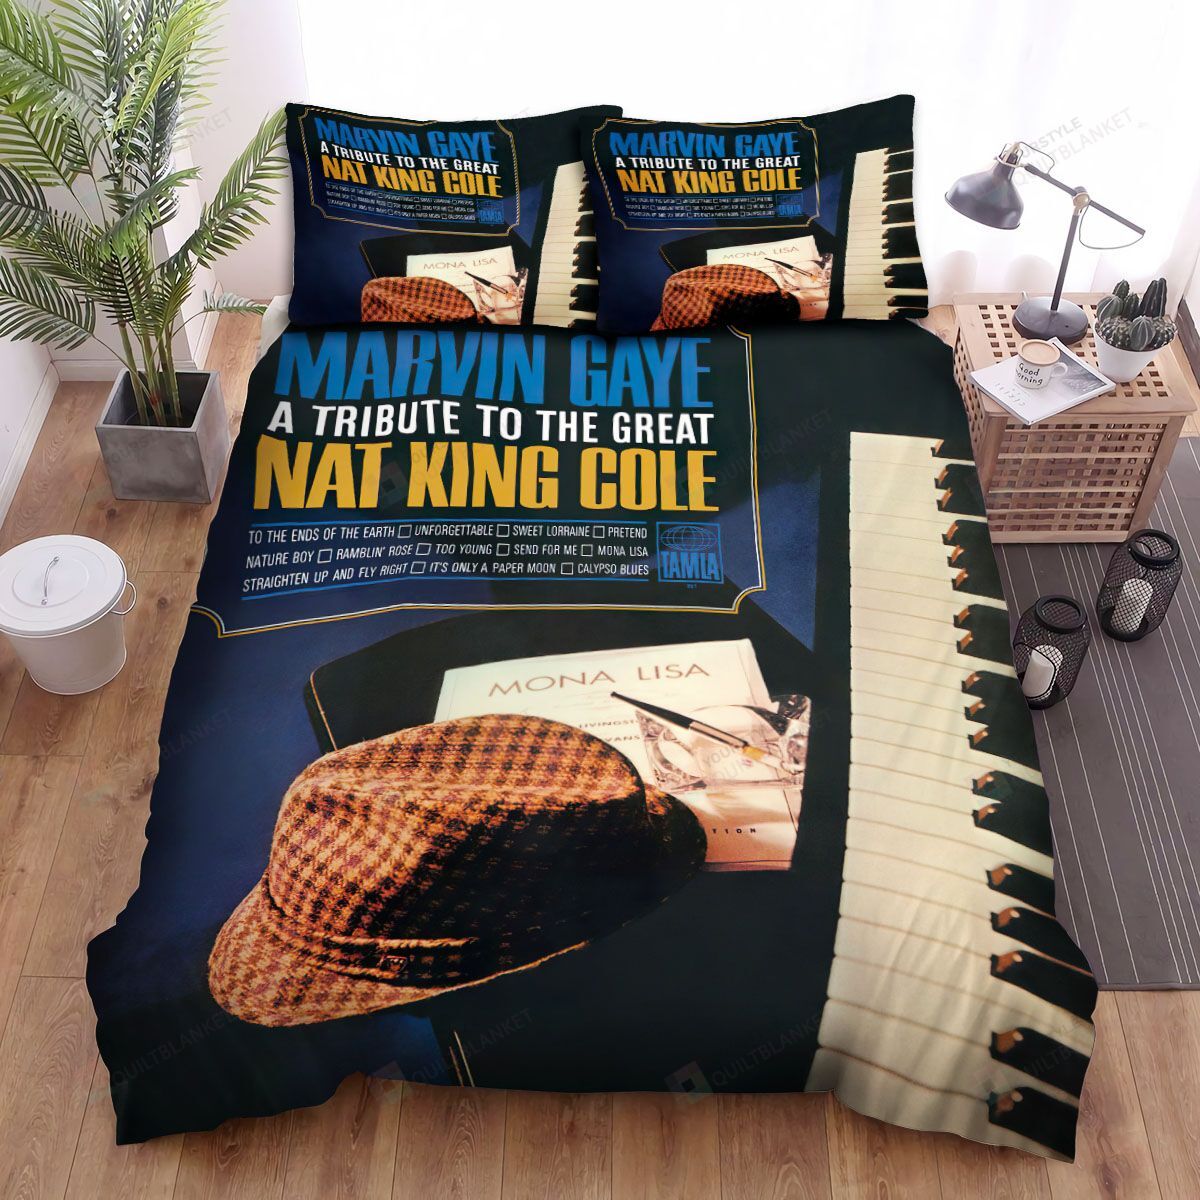 Marvin Gaye A Tribute To The Great Nat King Cole Bed Sheets Spread Comforter Duvet Cover Bedding Sets